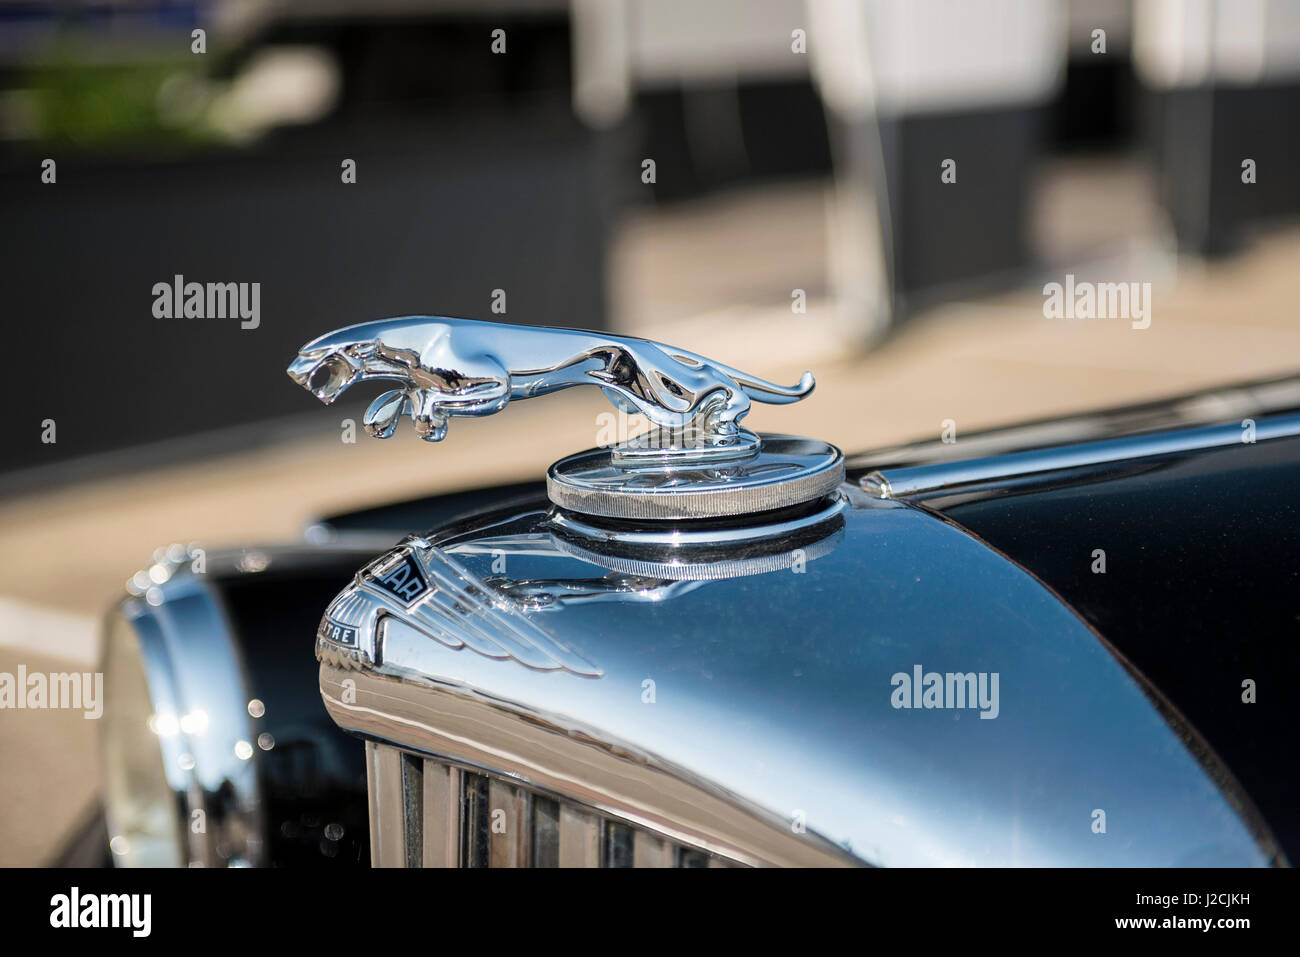 Jaguar Car Mascot High Resolution Stock Photography and Images - Alamy